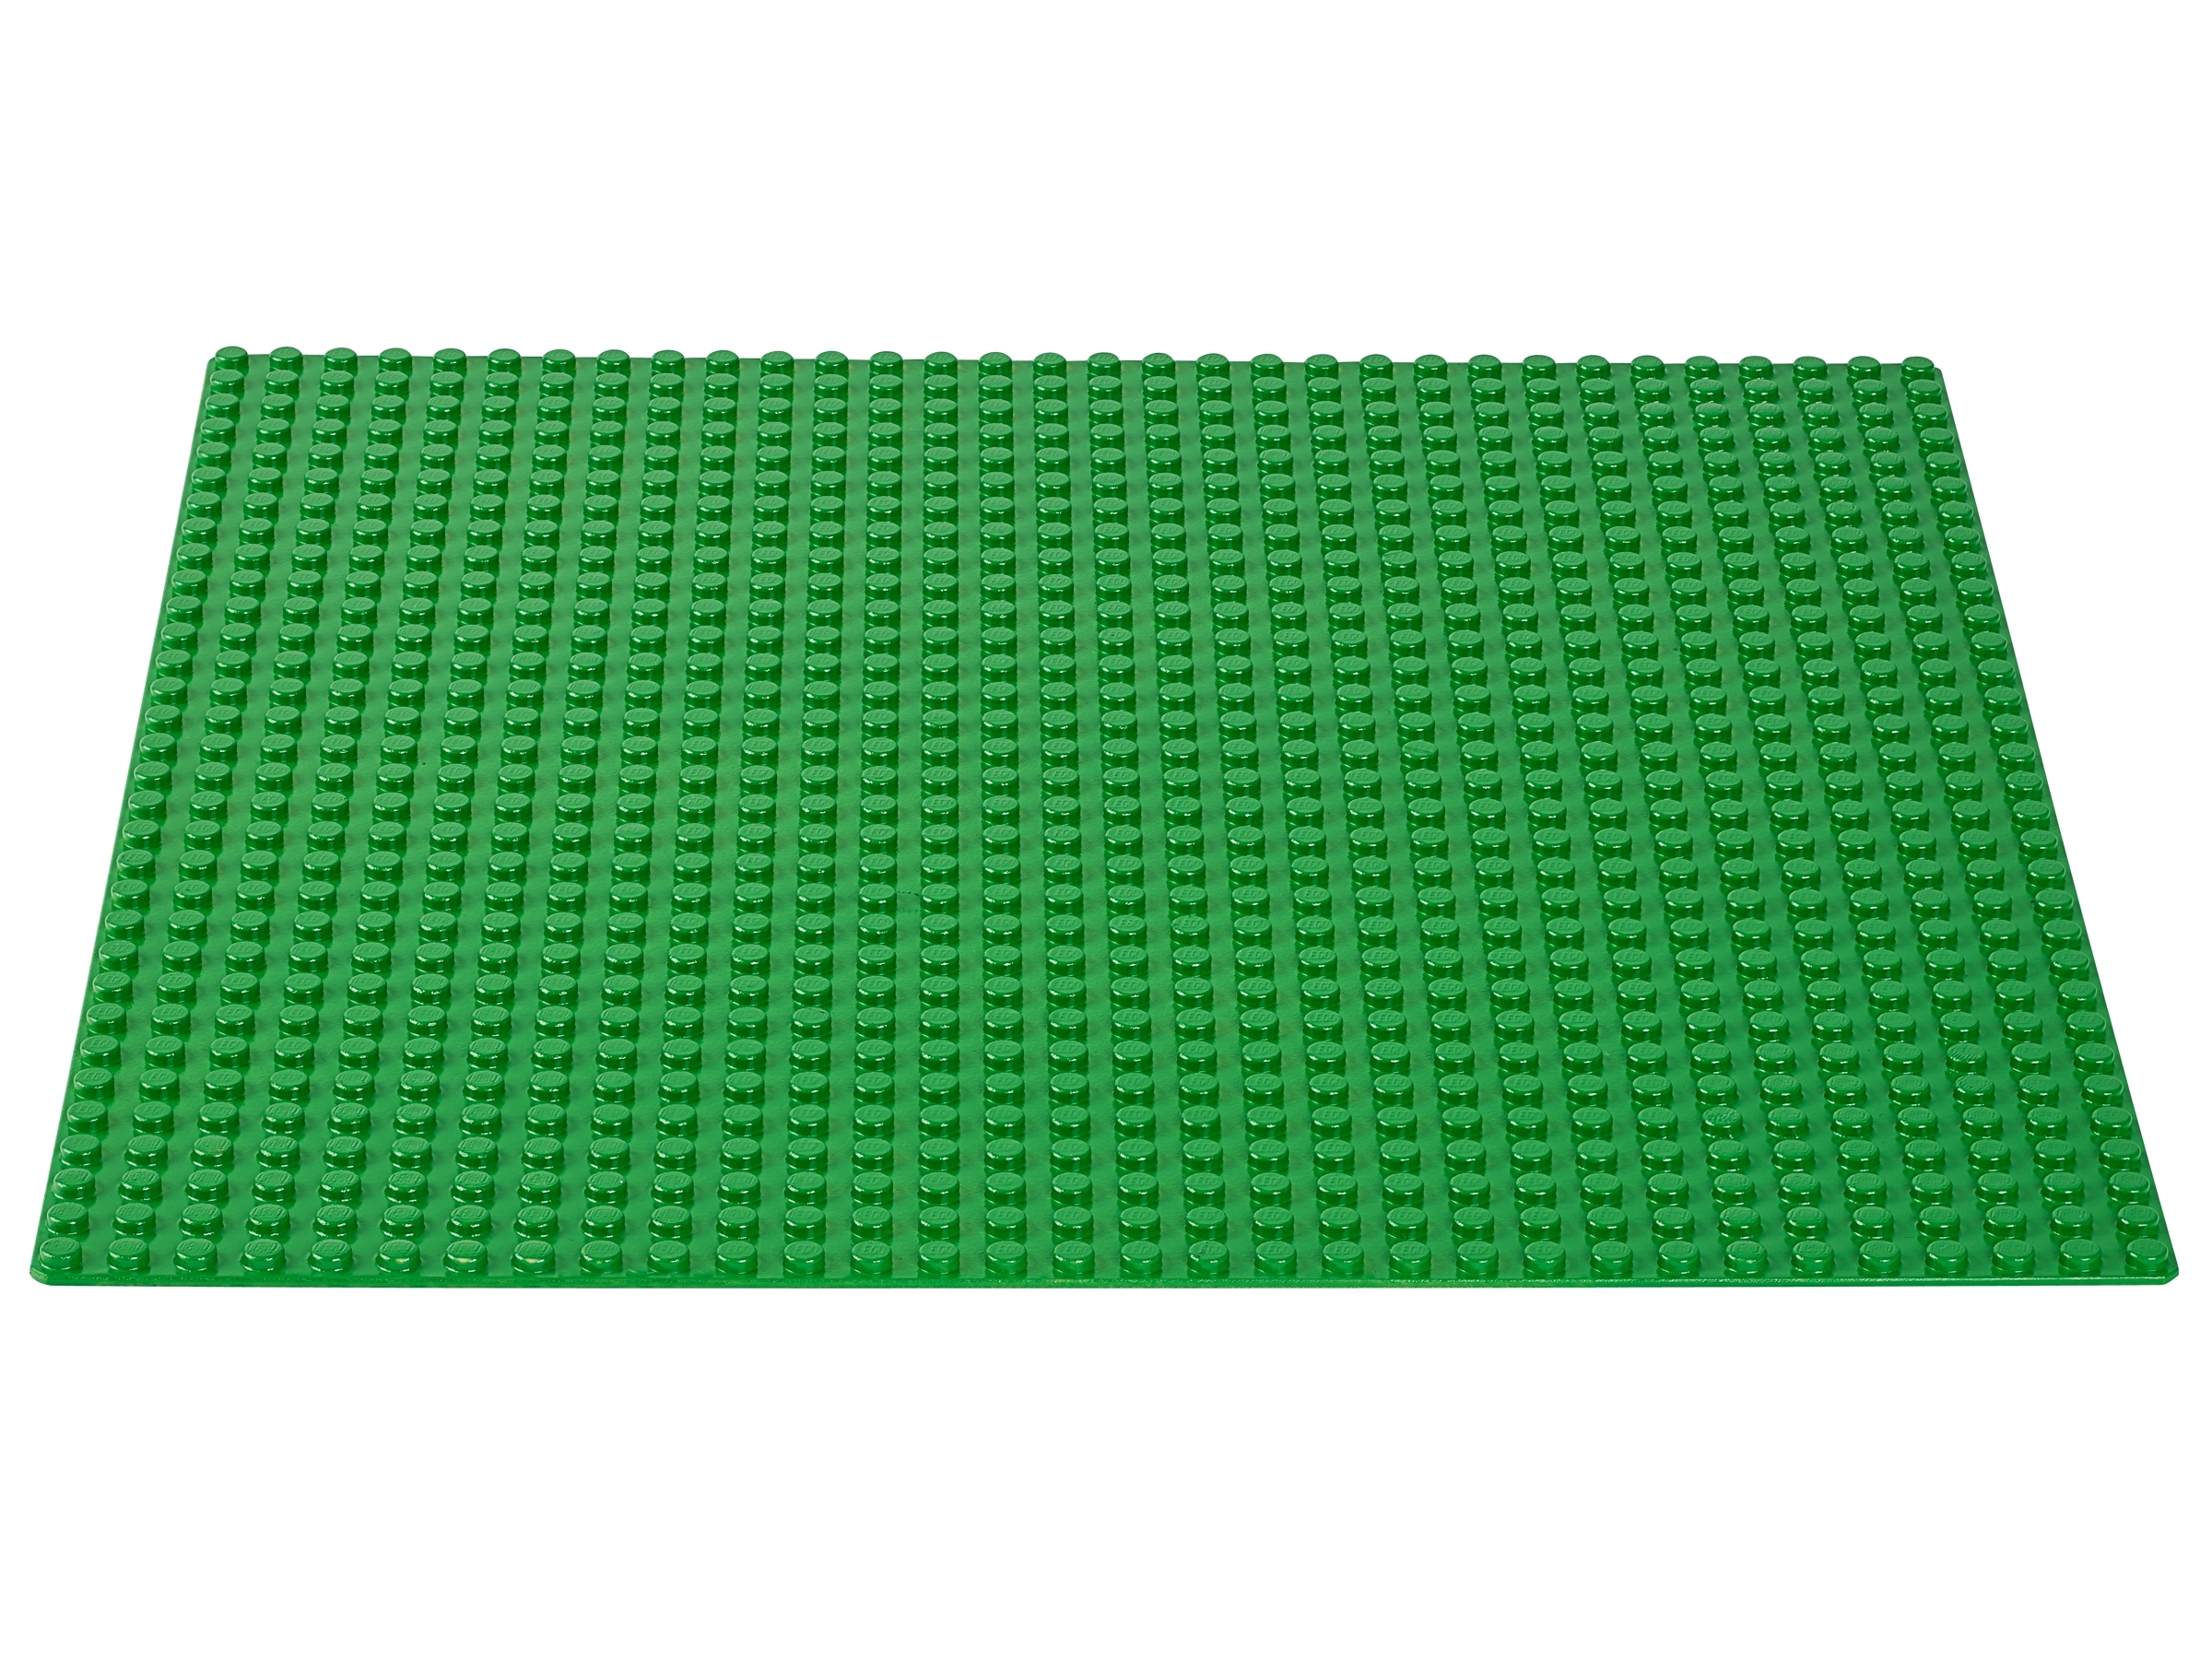 32x32 Dot 10x10 inch Comptible GREEN Base Plates 2 LEGO Separator WITH BONUS: 